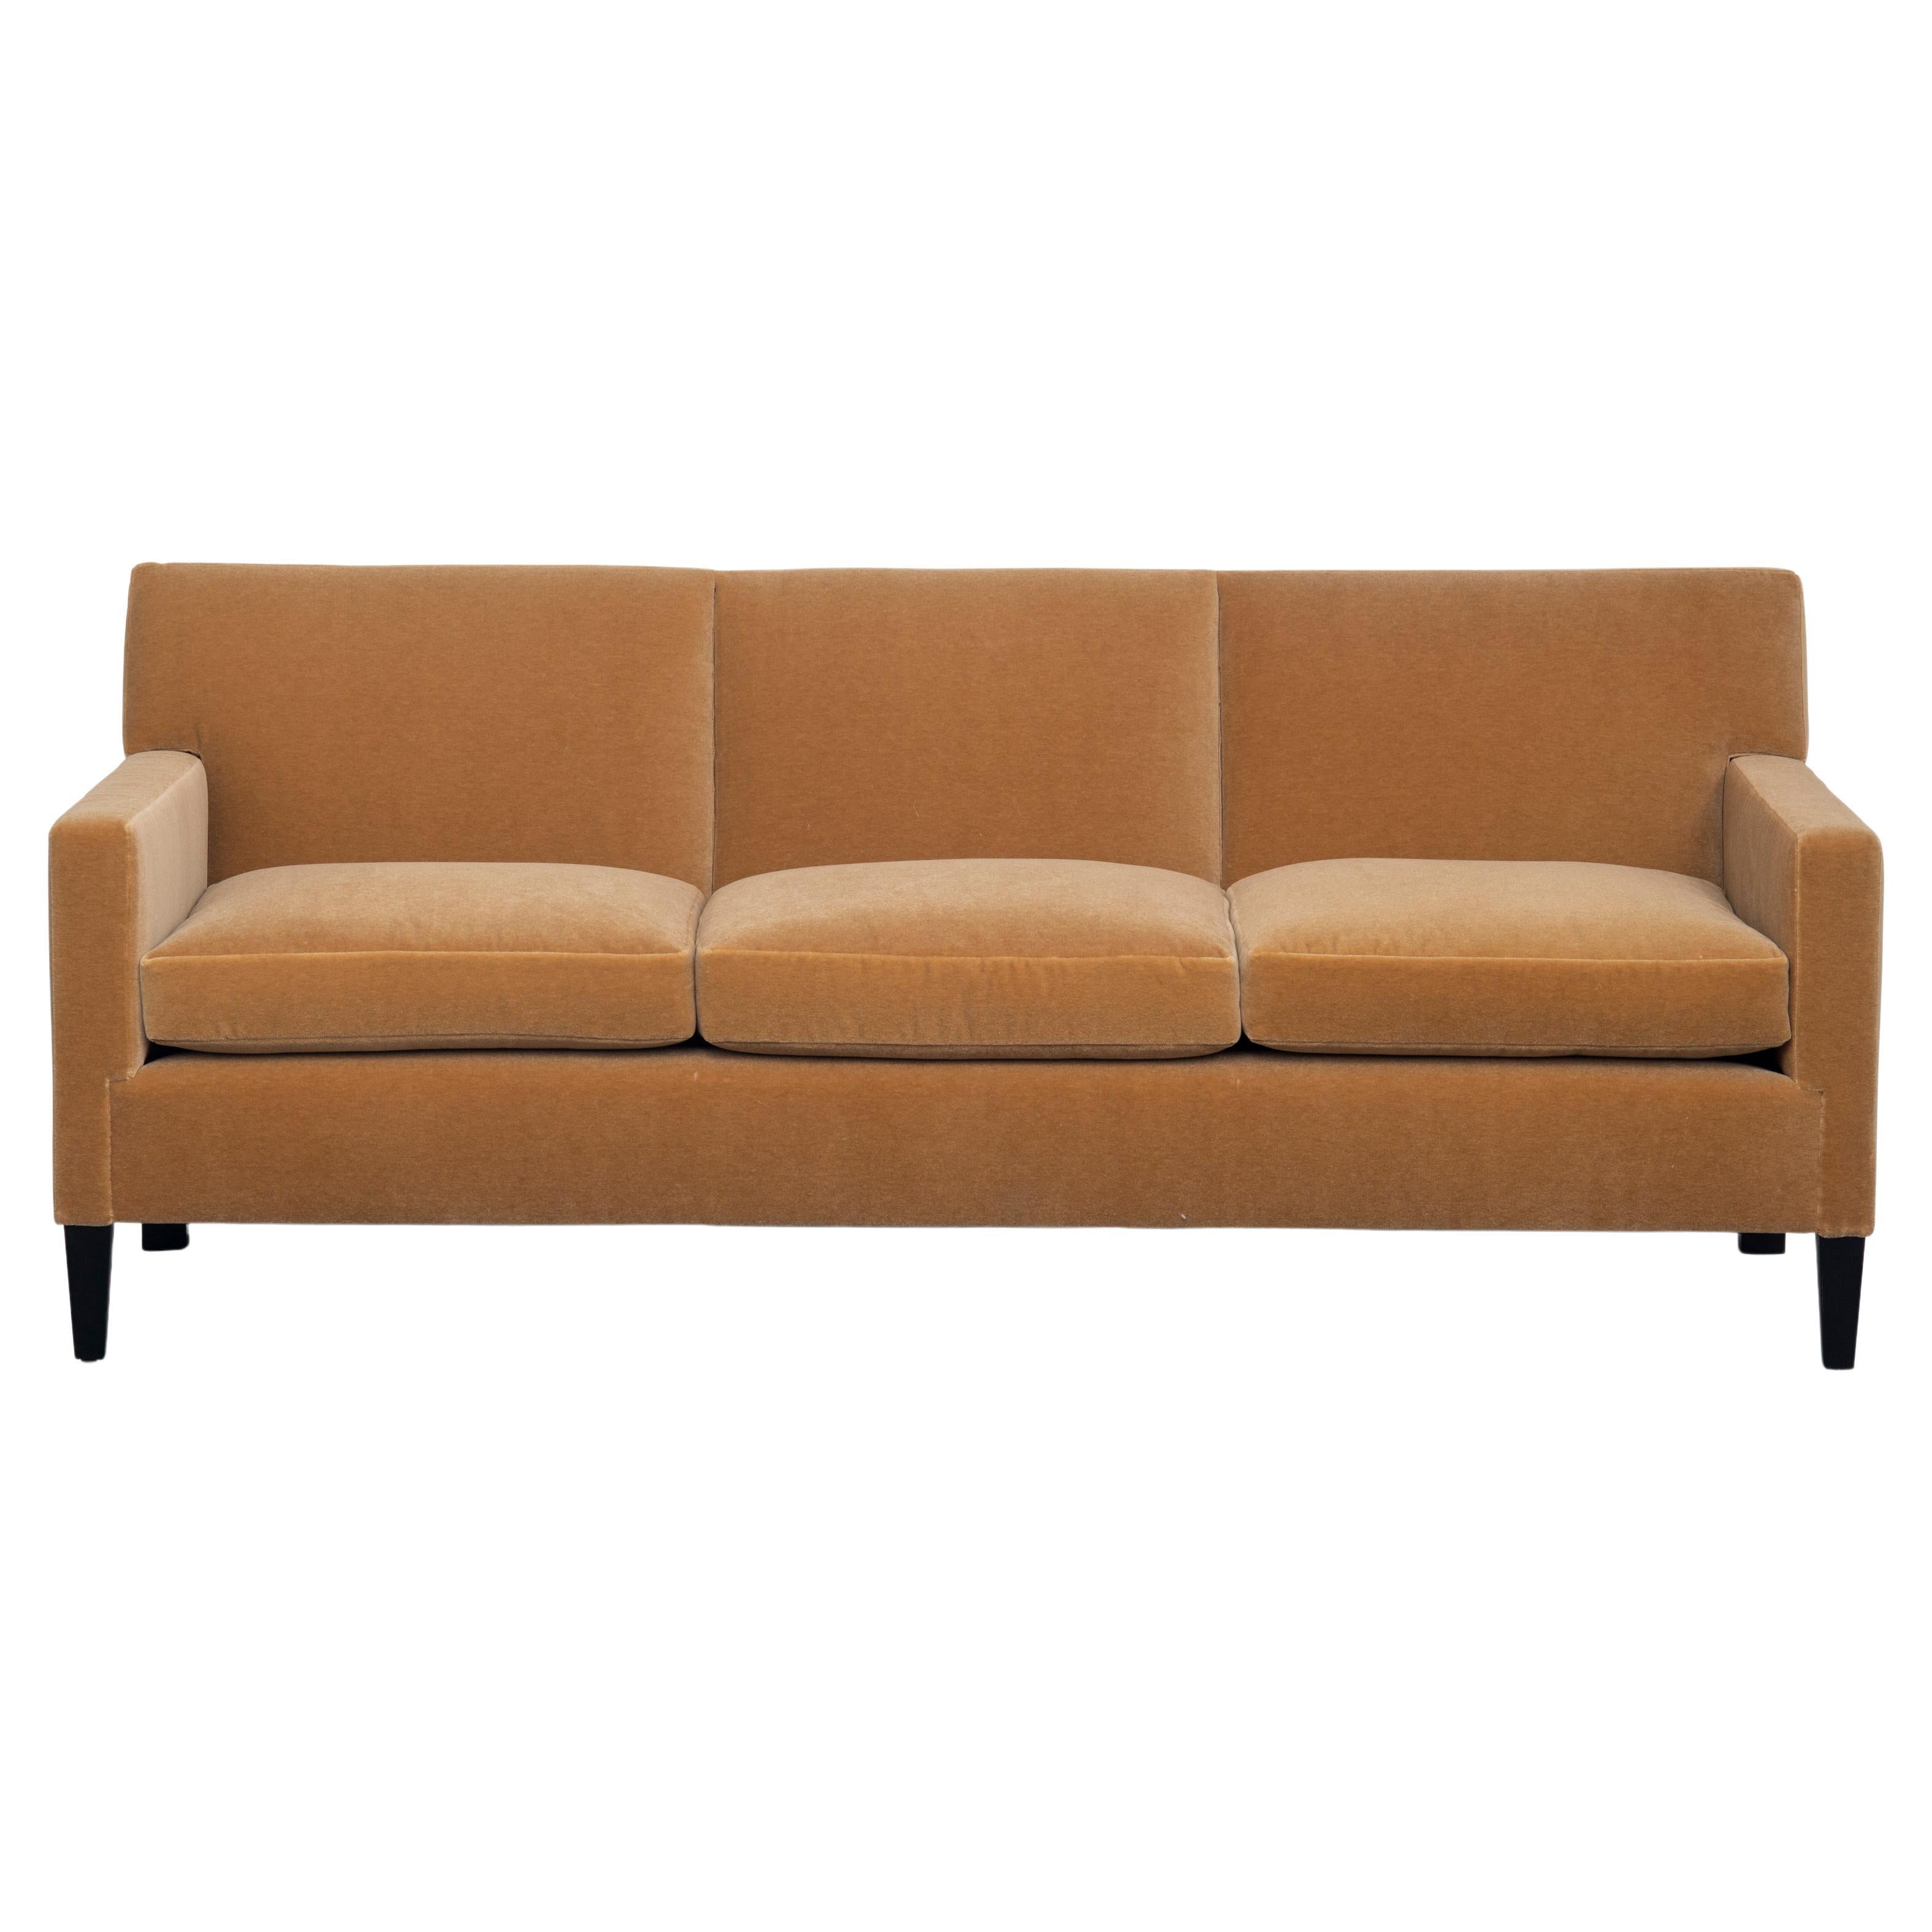 Hand-Crafted Union Long Sofa